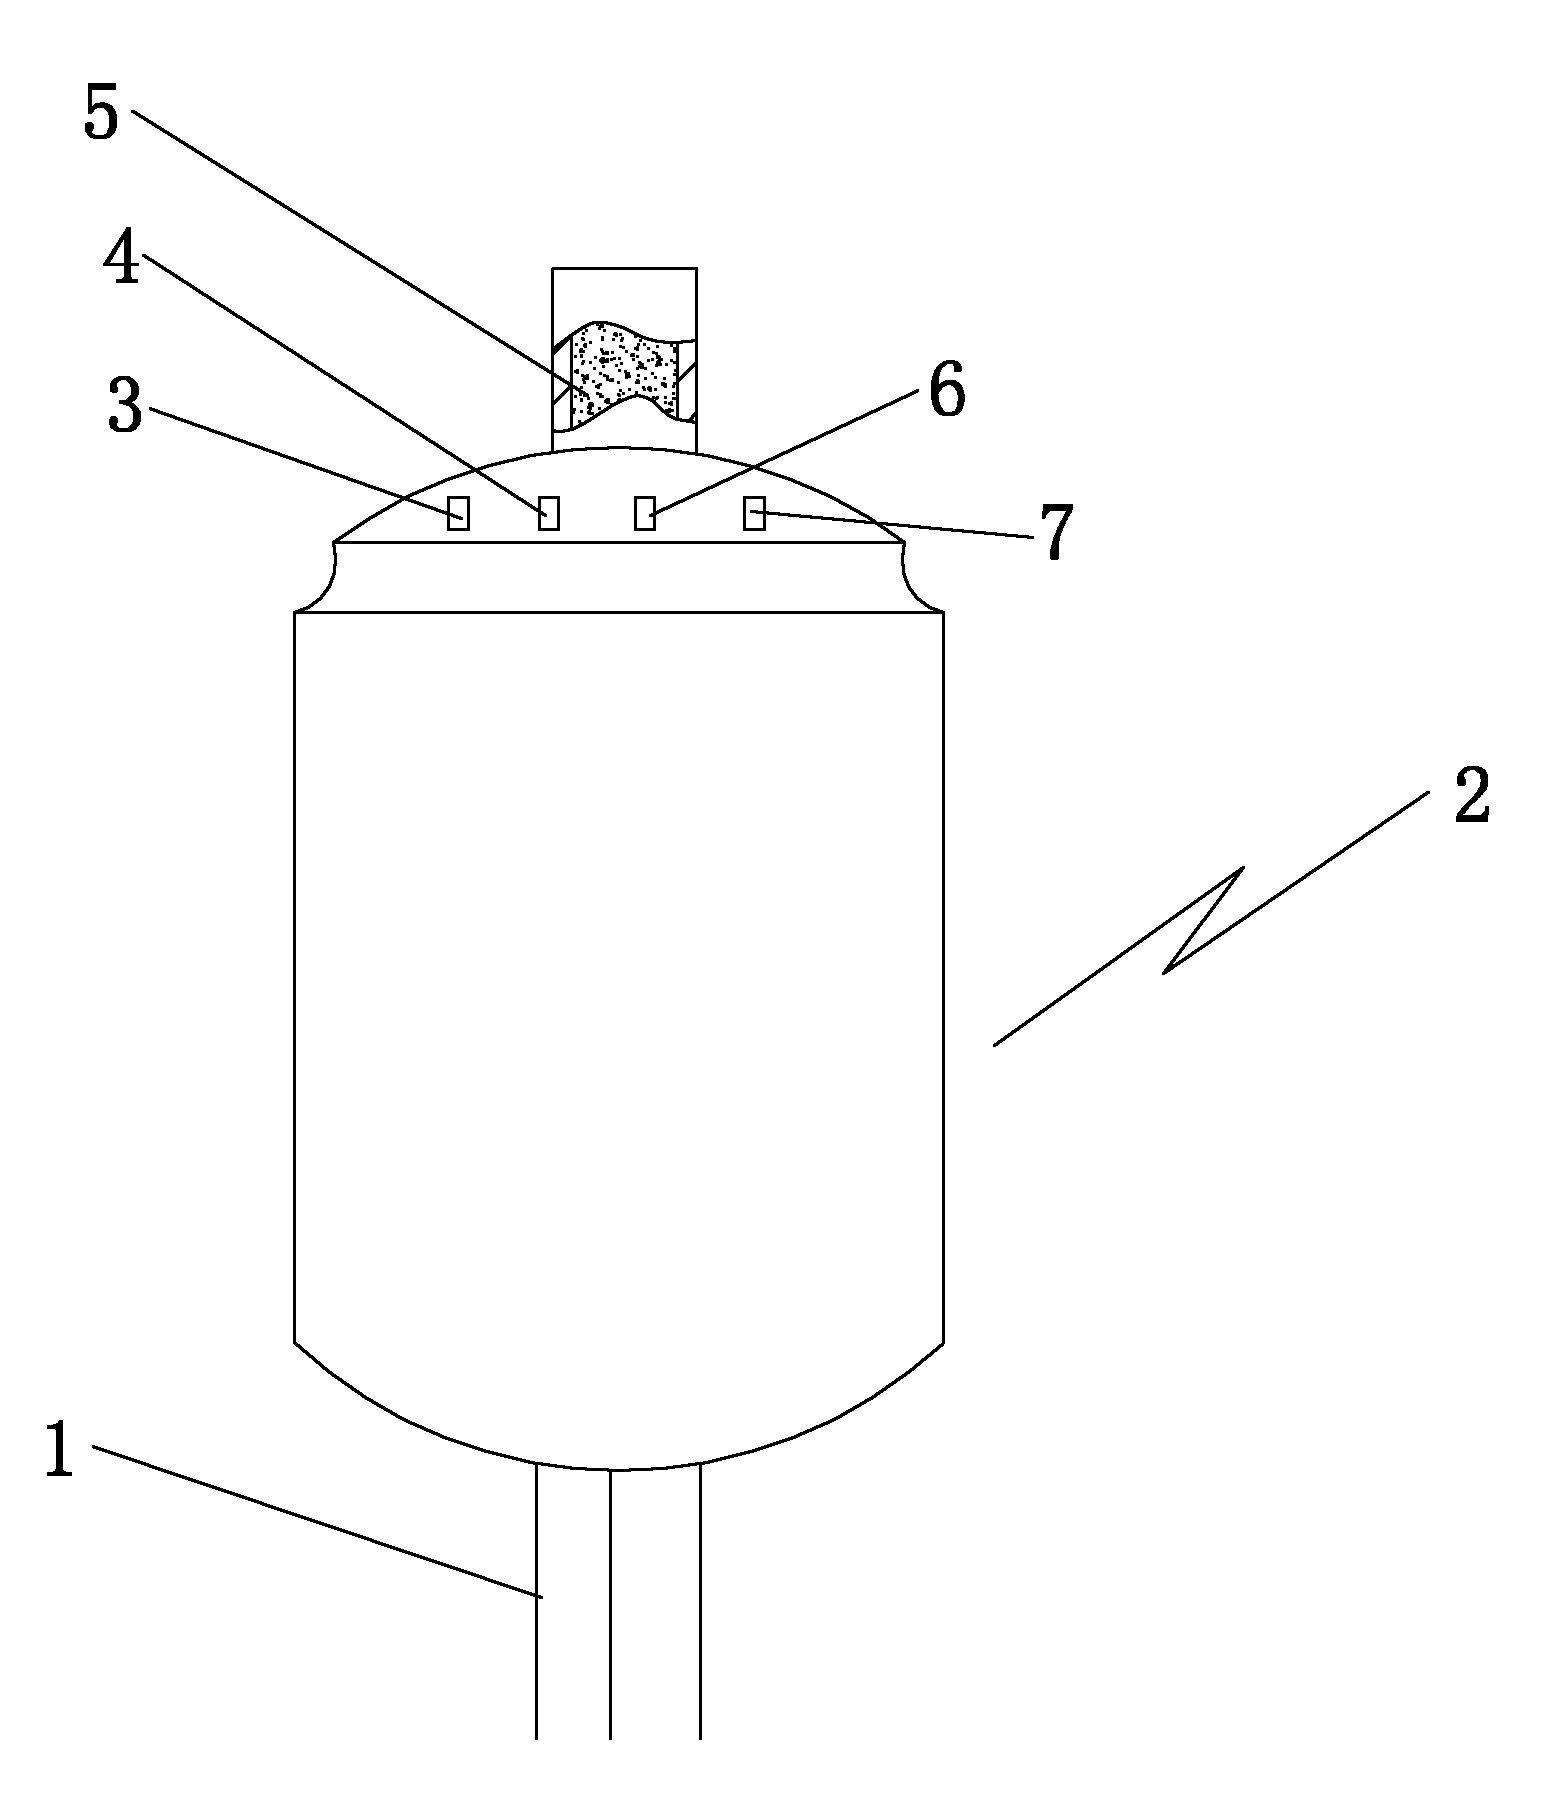 A special reaction kettle for the preparation of hydrofluoric acid